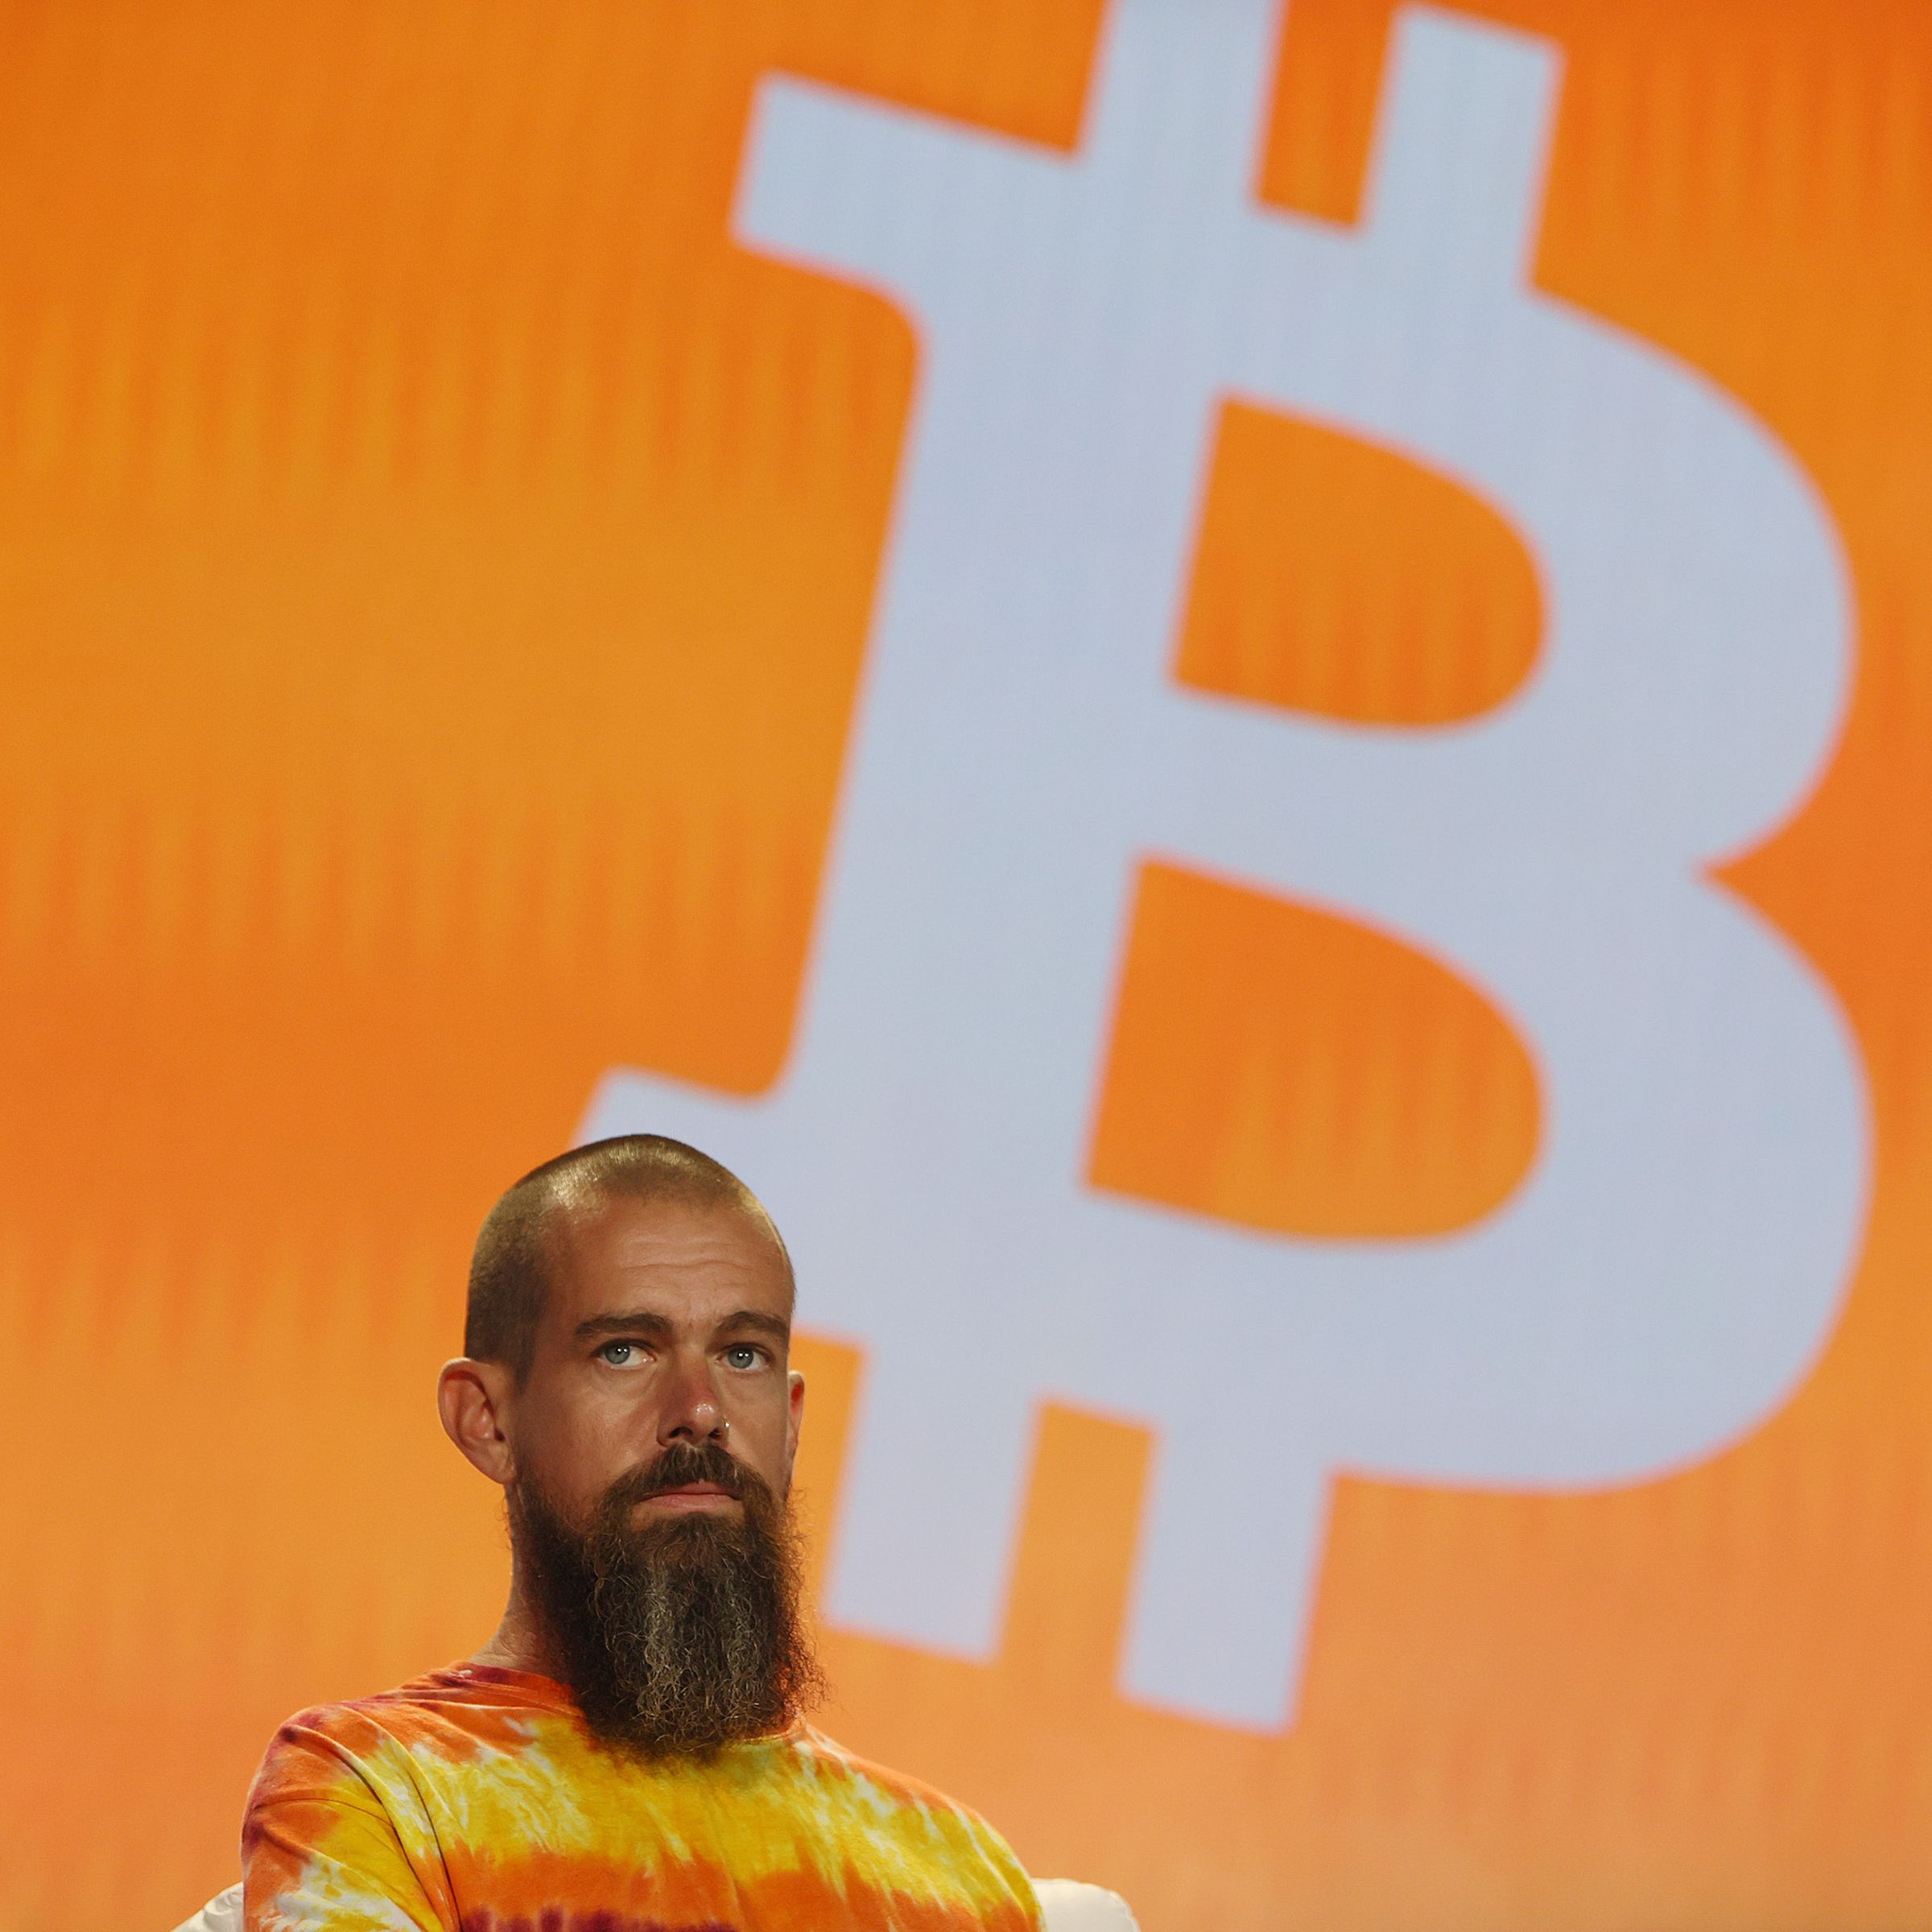 Bitcoin Conference Draws Cryptocurrency Fans To Miami